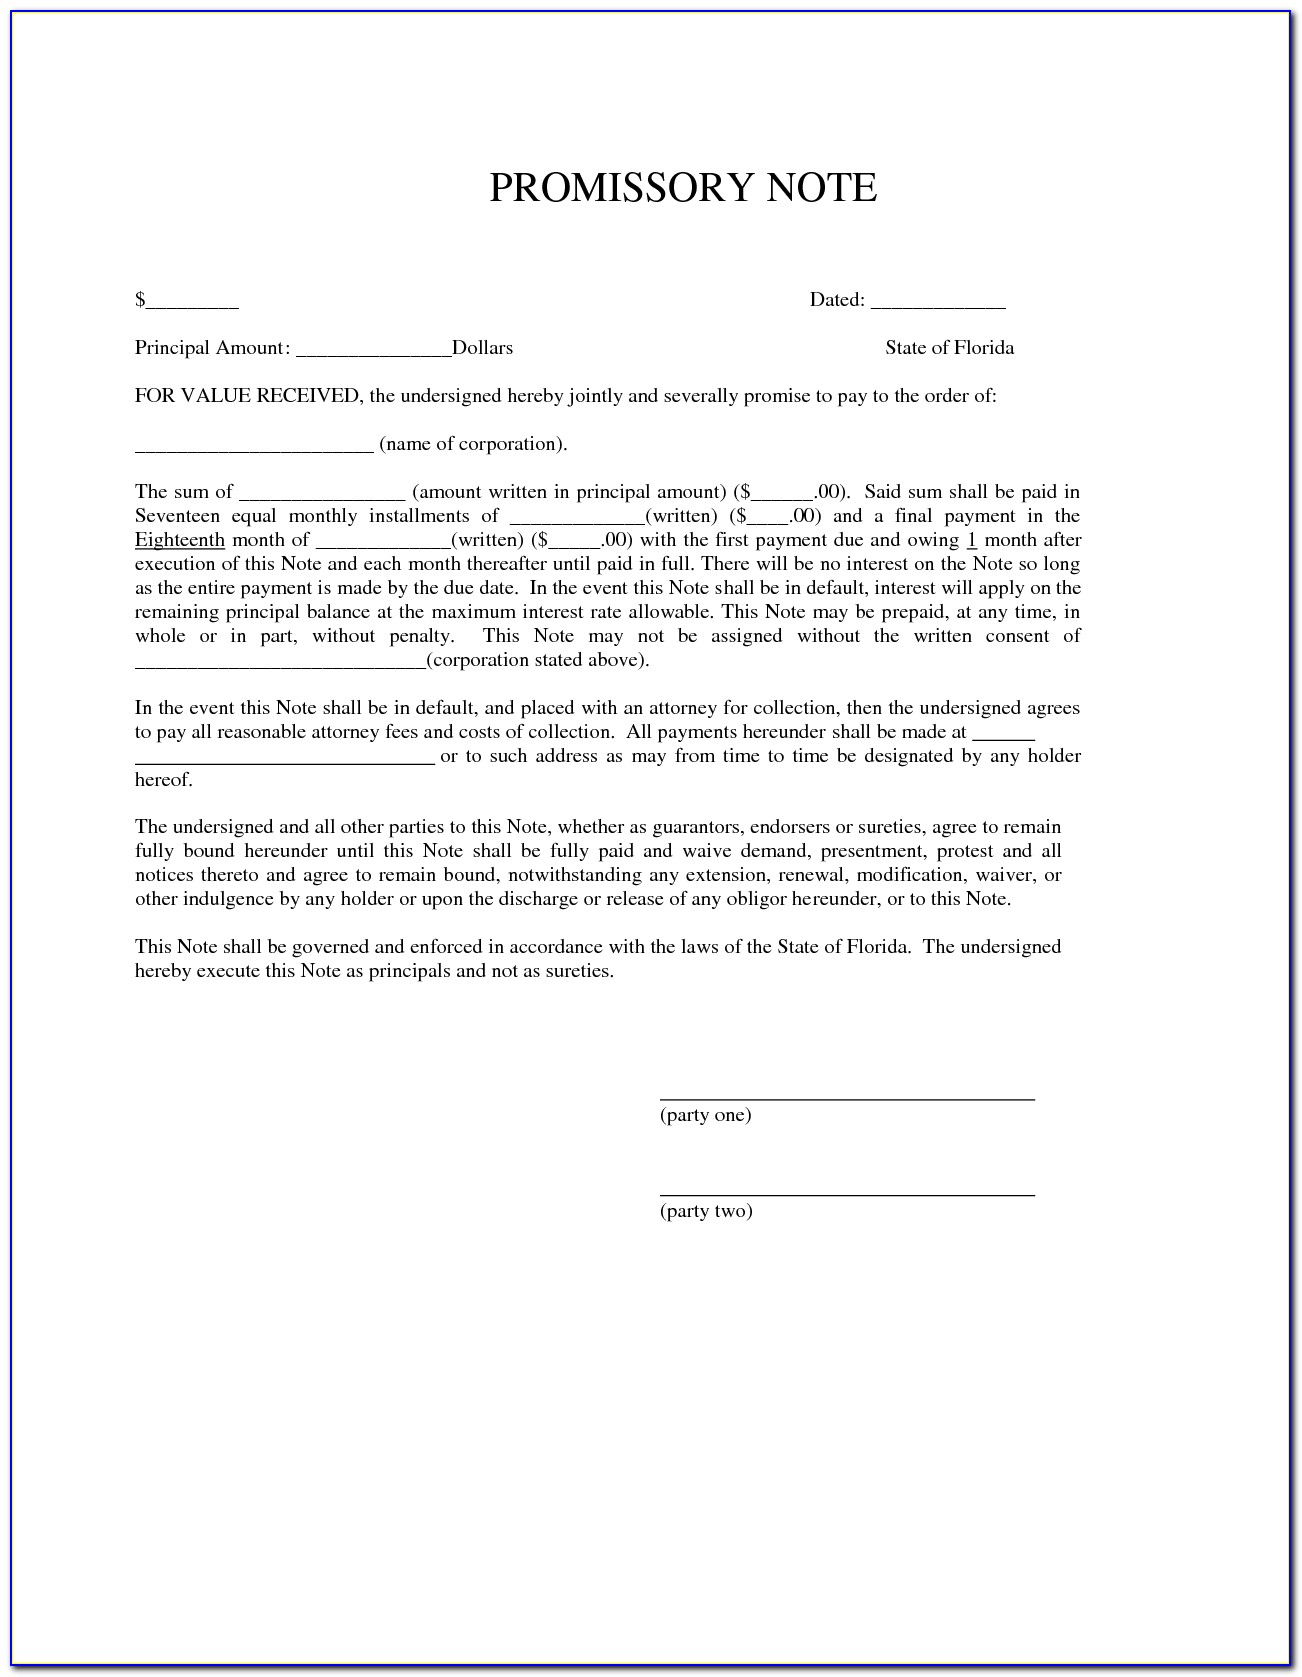 Form Of Promissory Note Illinois